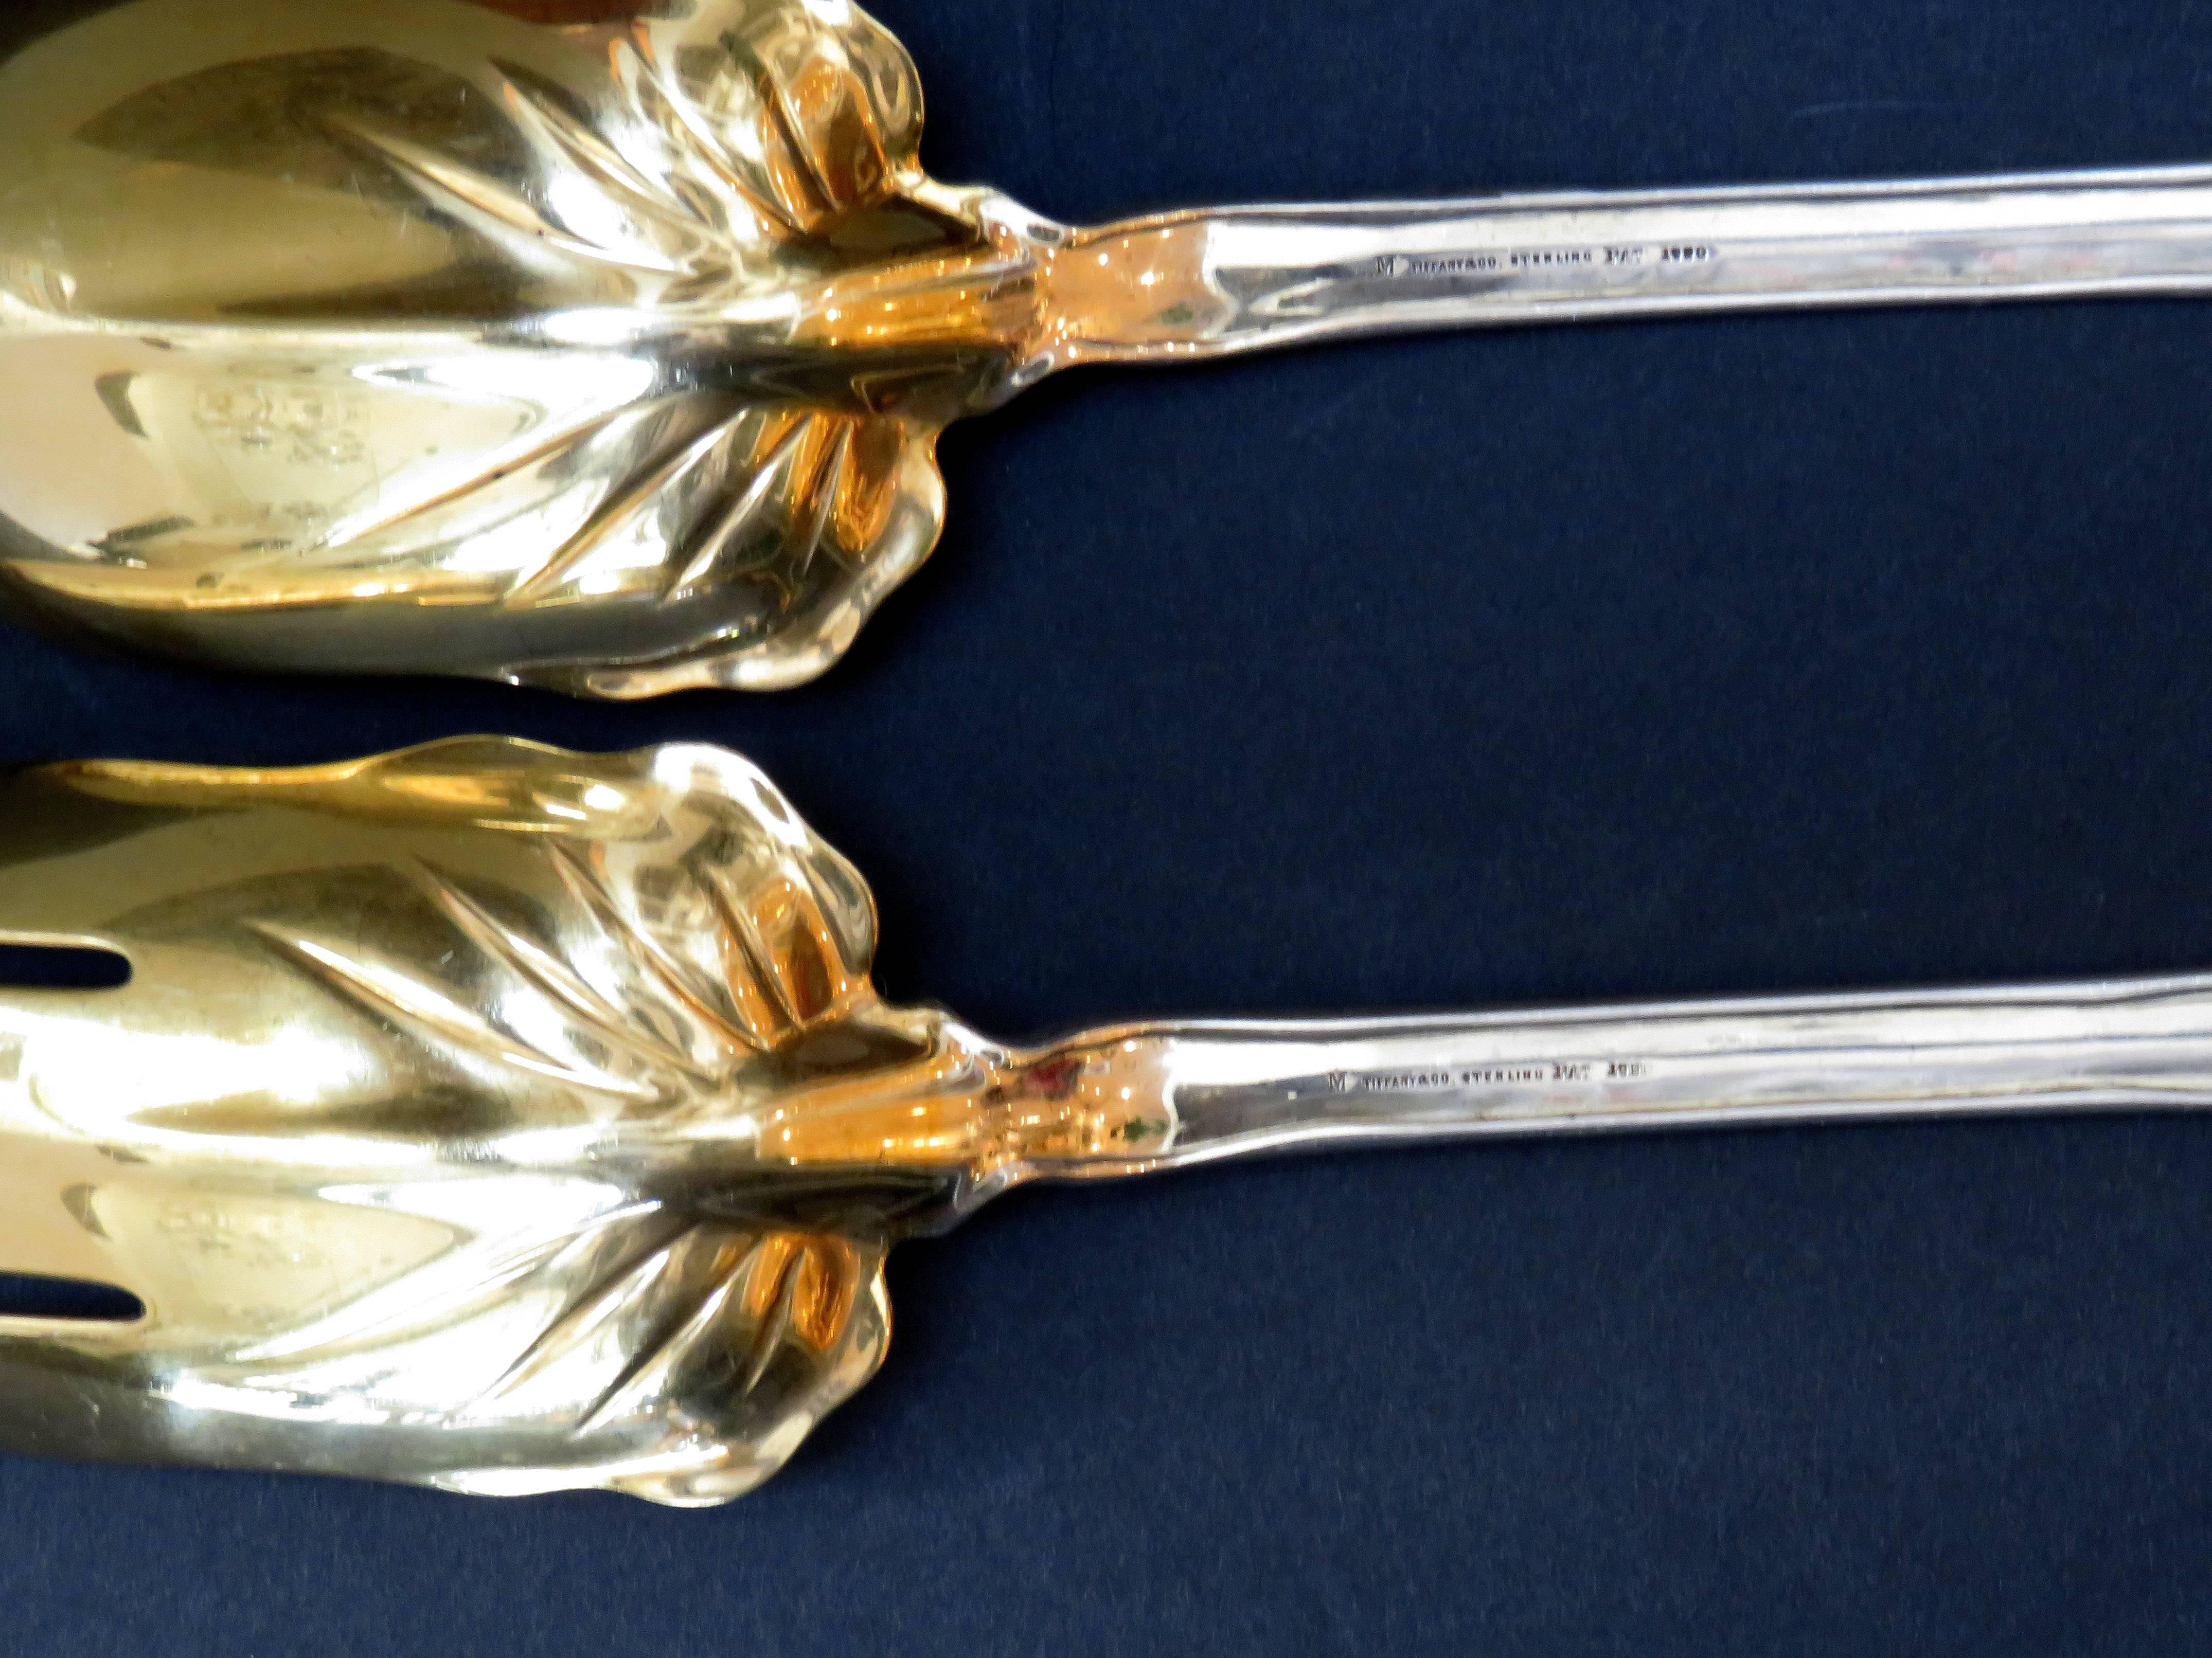 Tiffany & Company Lap Over Edge Acid Etched Salad Set, circa 1880 In Good Condition For Sale In San Francisco, CA